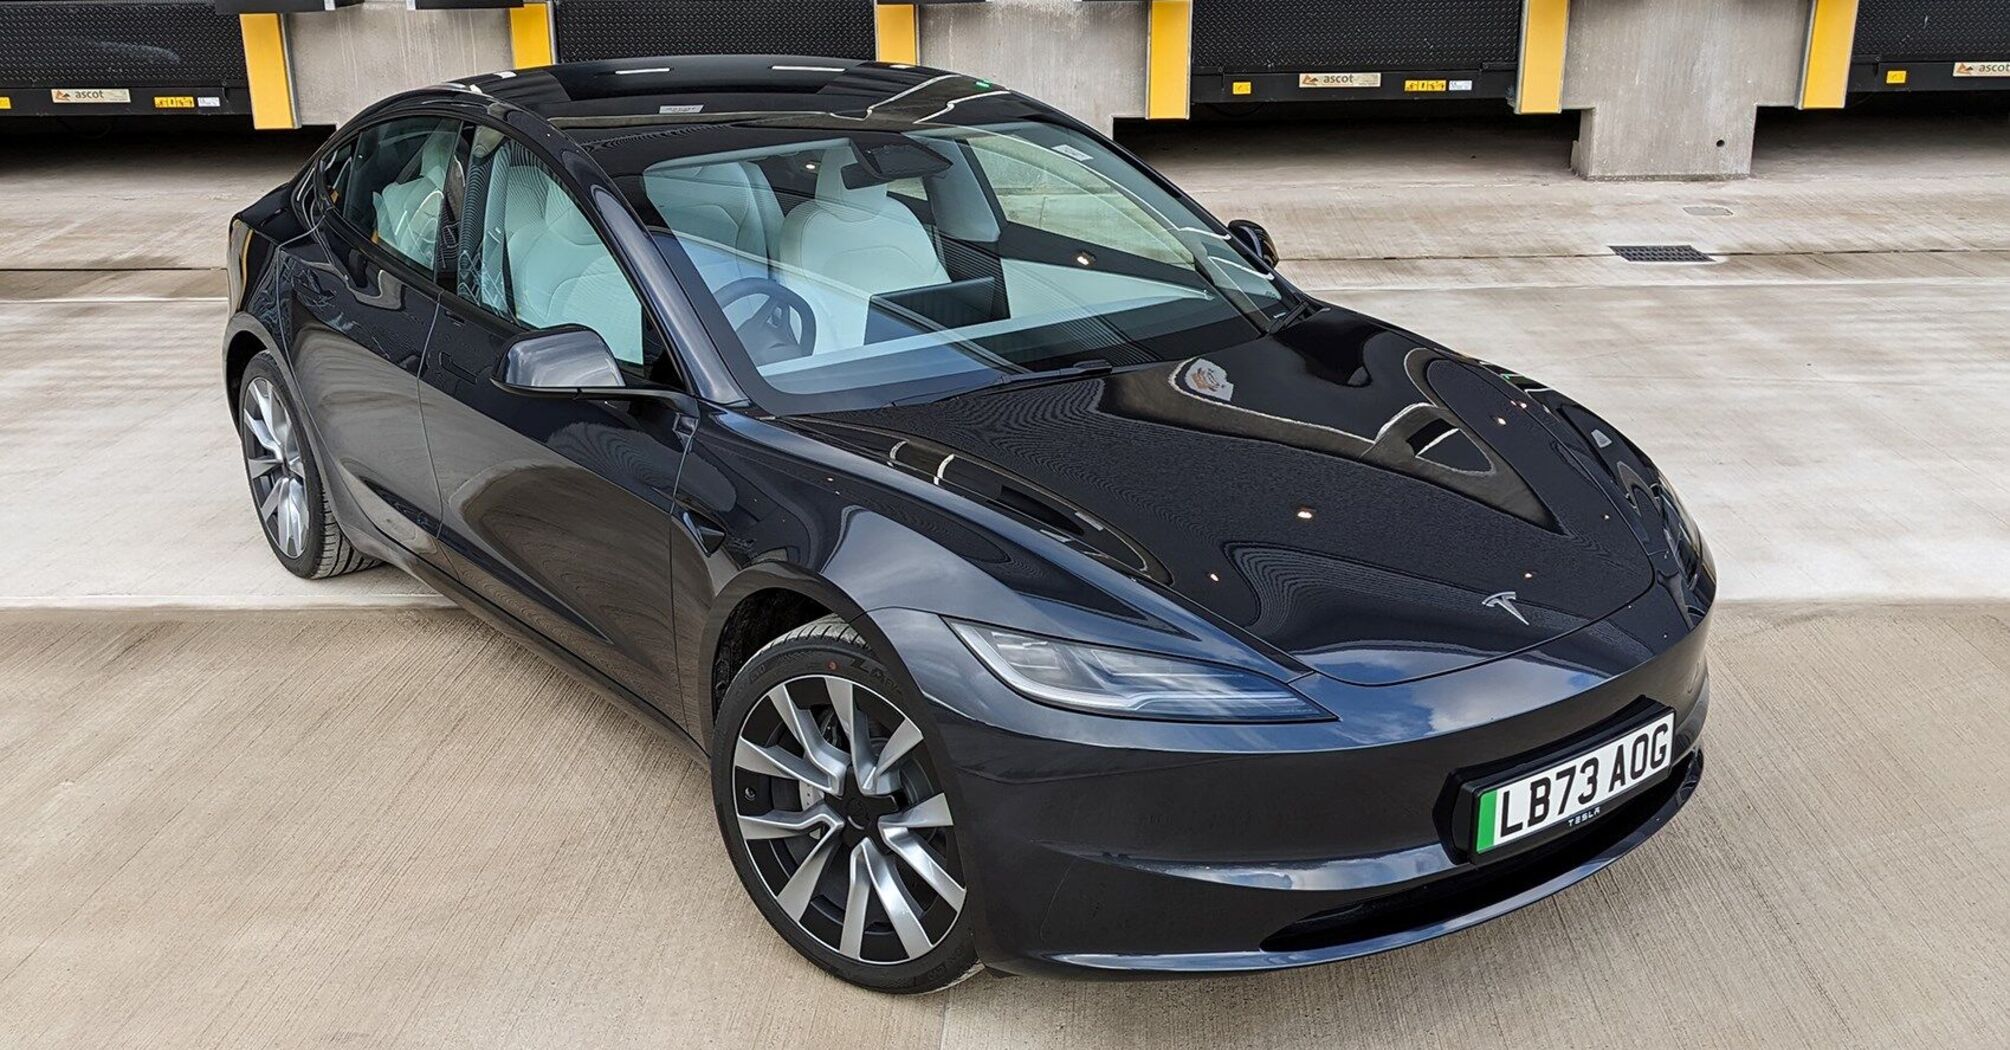 New budget electric car from Tesla